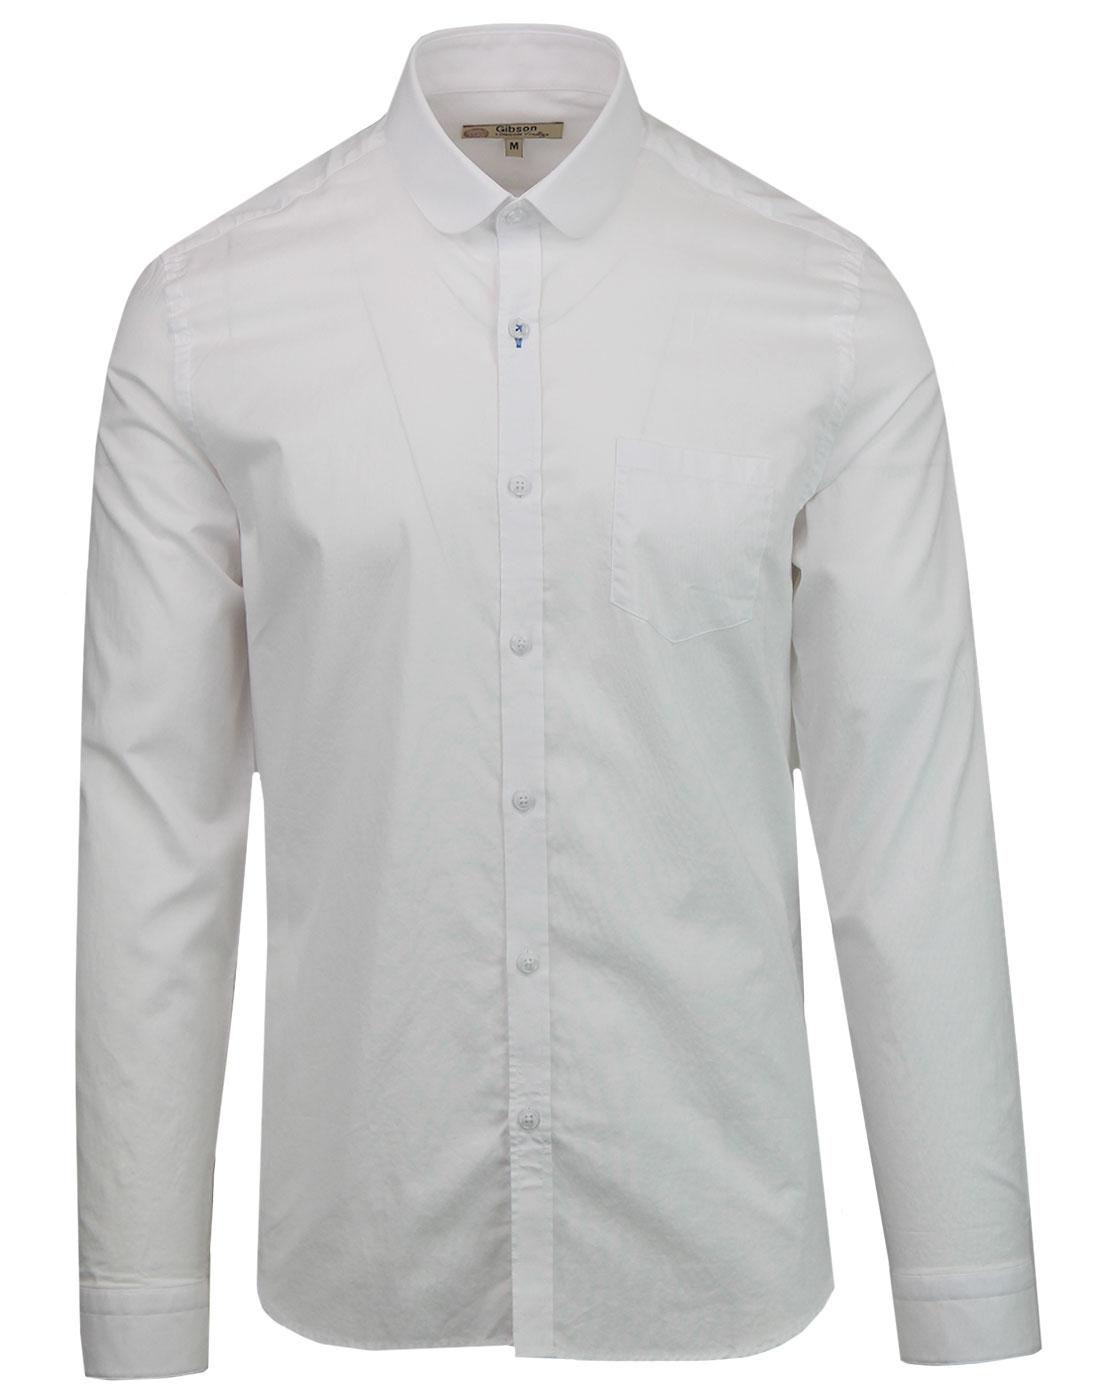 GIBSON LONDON 60s Mod Penny Round Collar Shirt in White